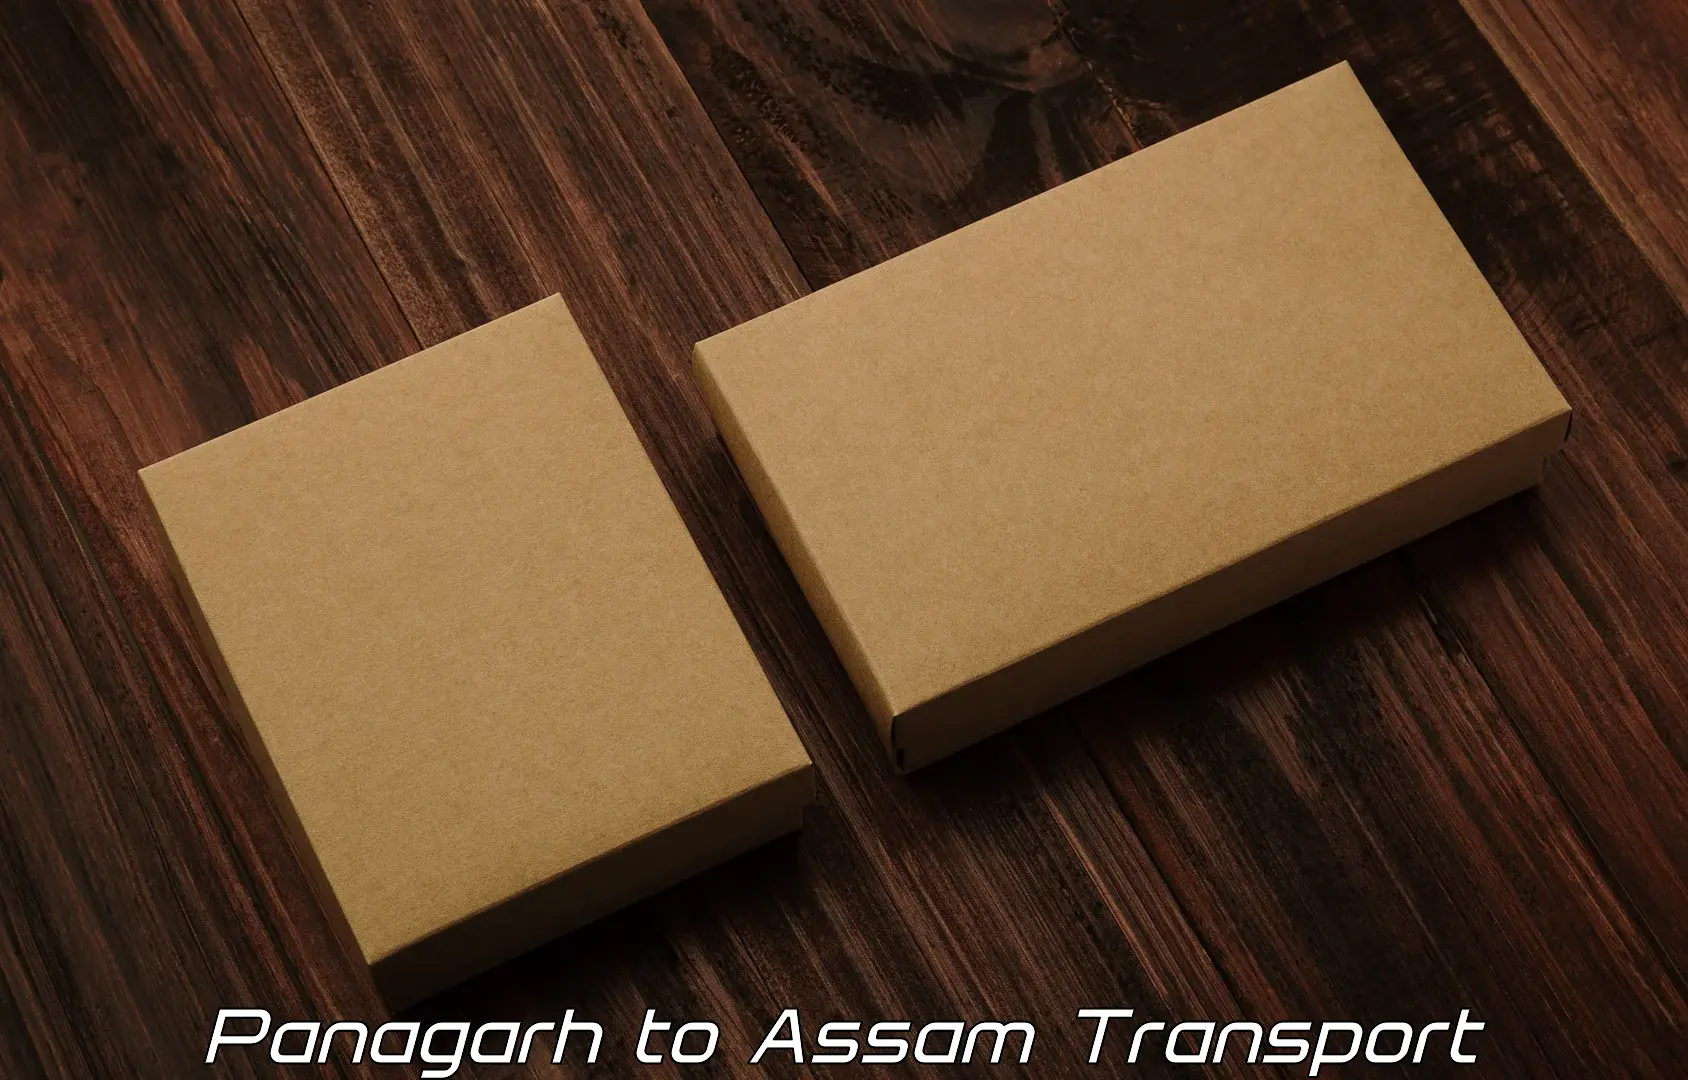 Domestic goods transportation services Panagarh to Jagiroad